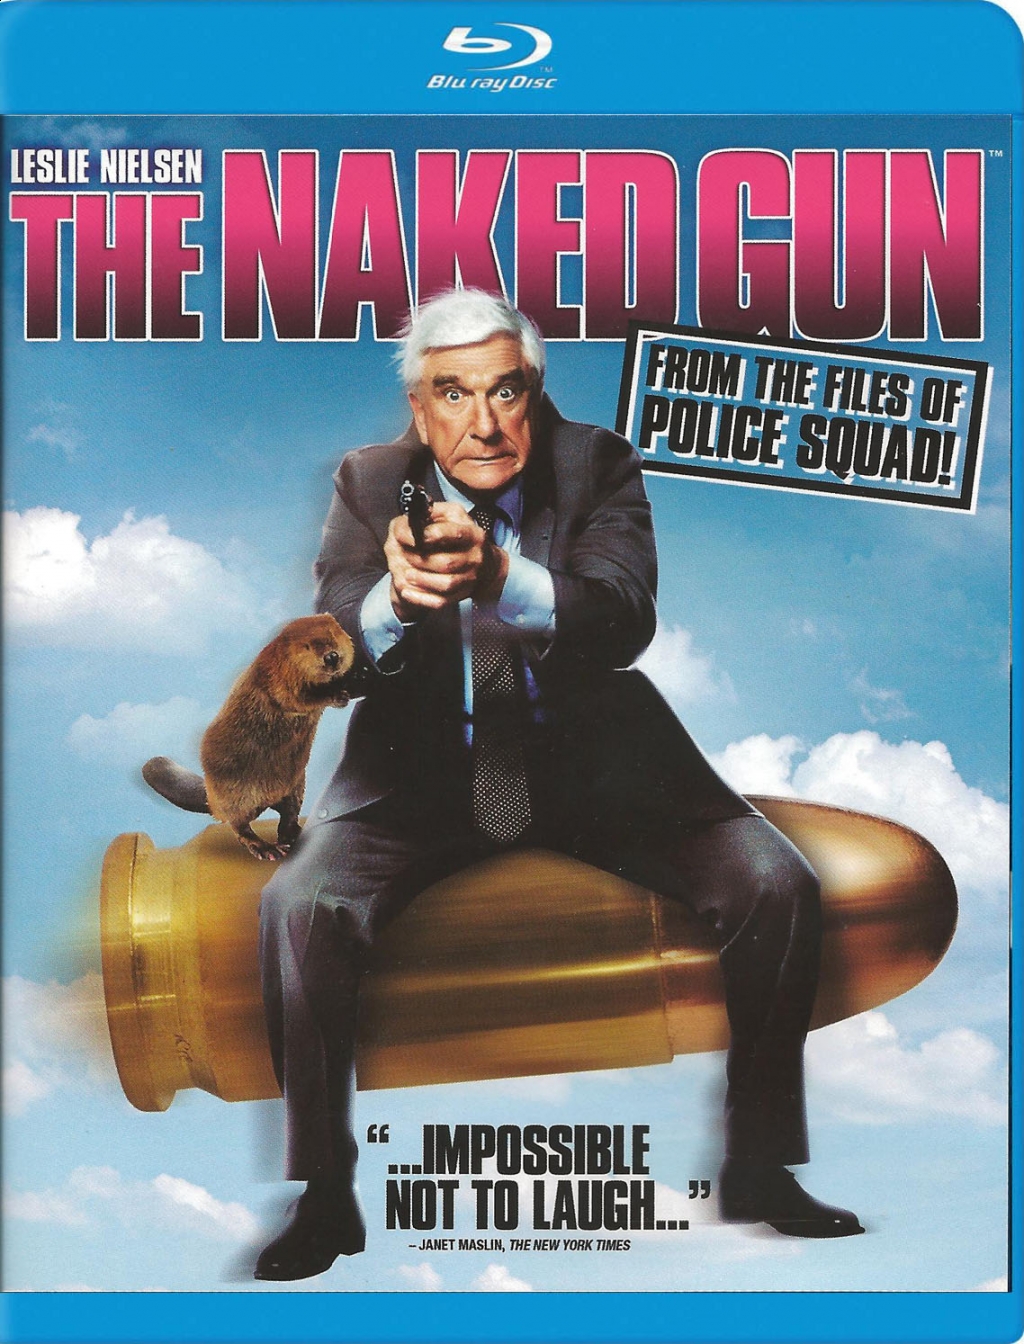 Pin on Police Squad / The Naked Gun